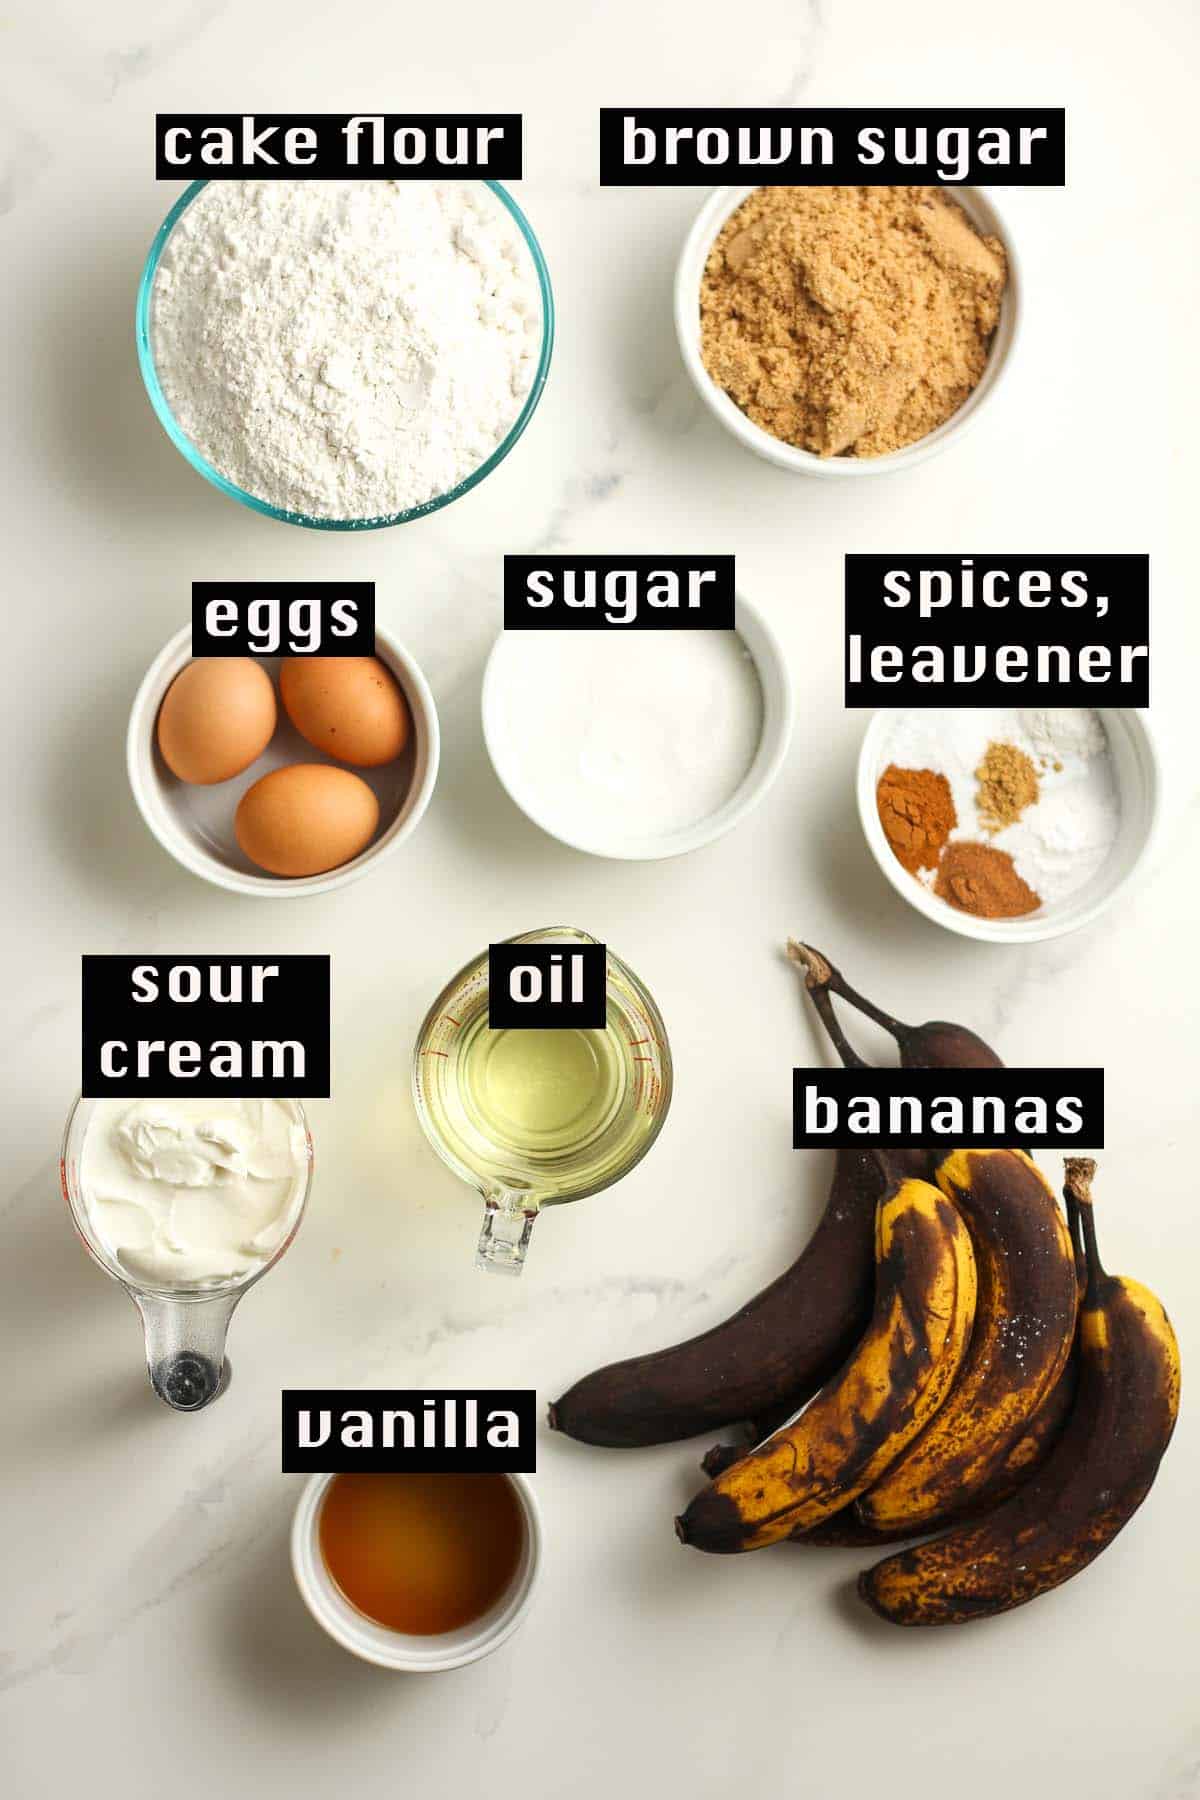 The ingredients for the banana sheet cake.